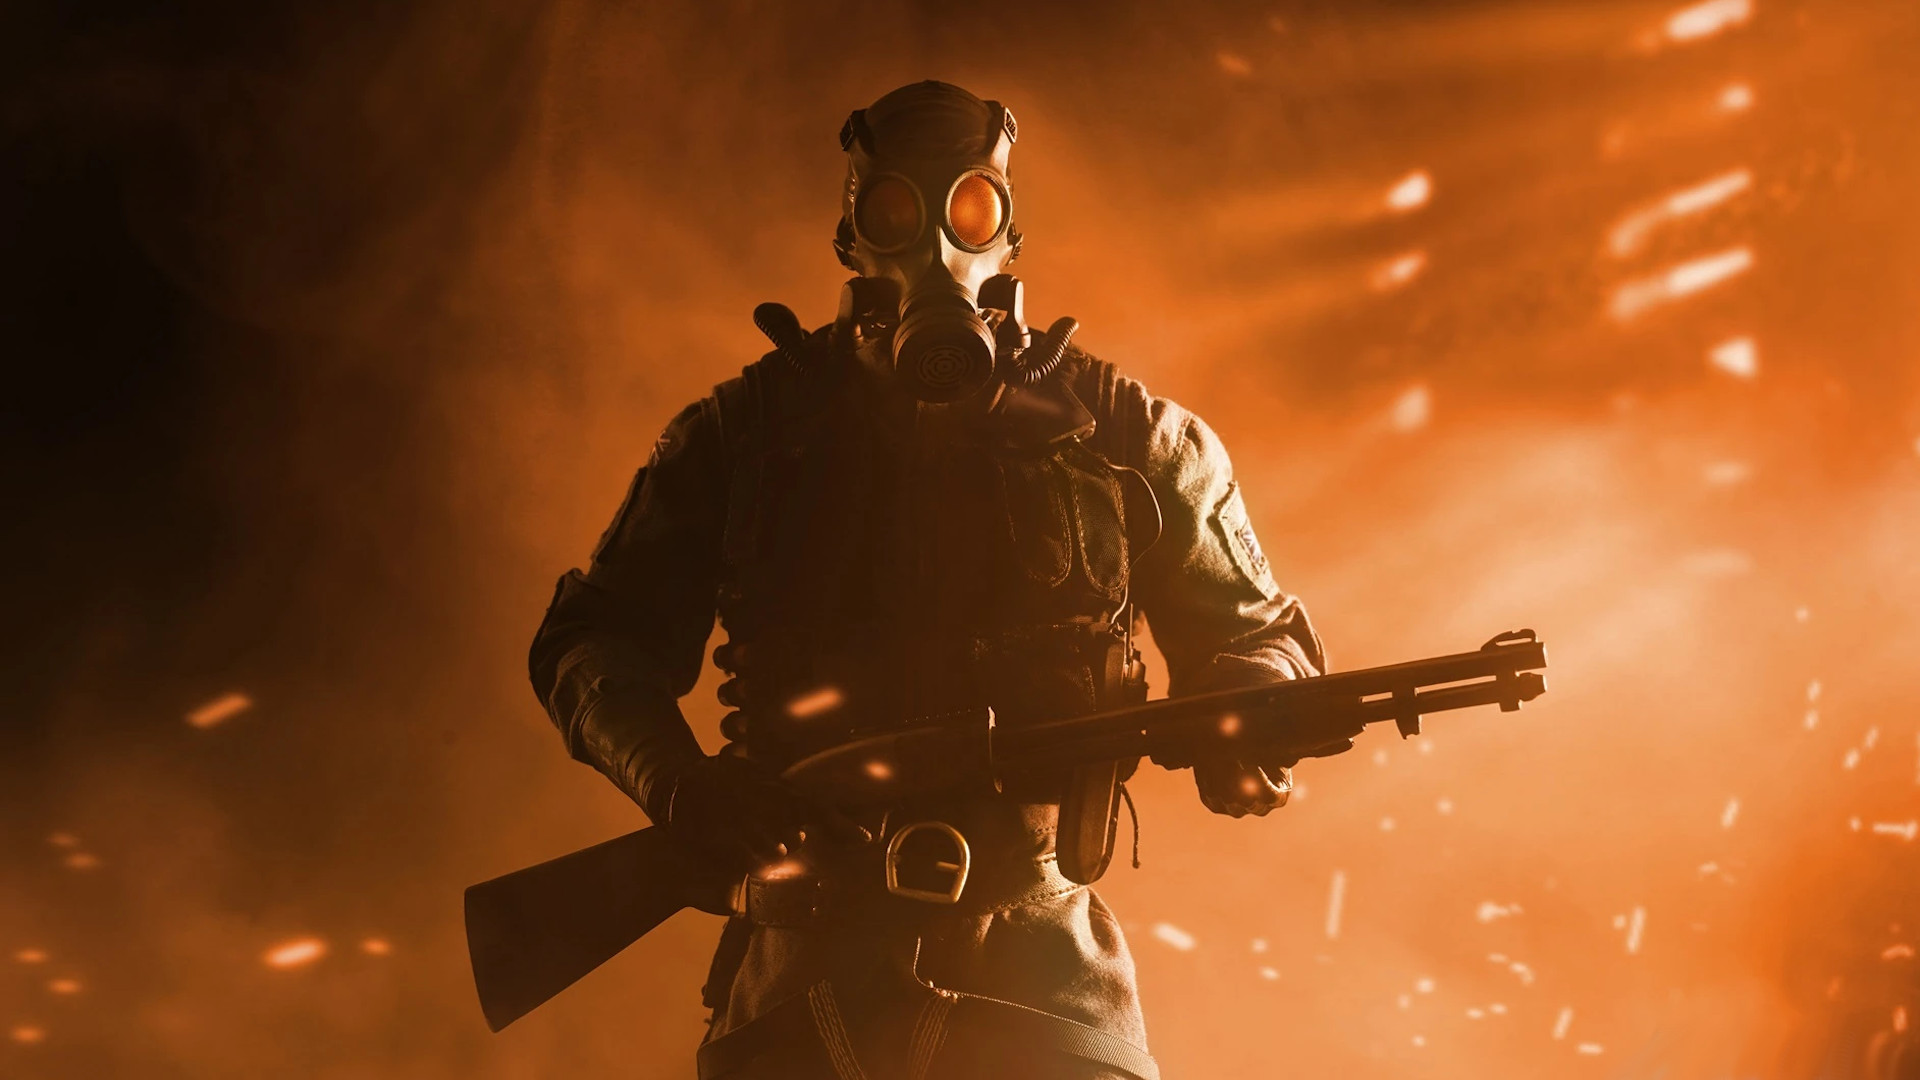 Rainbow Six Siege North Star: Smoke wearing a gas mask and gripping a pump shotgun tightly with embers in the background.